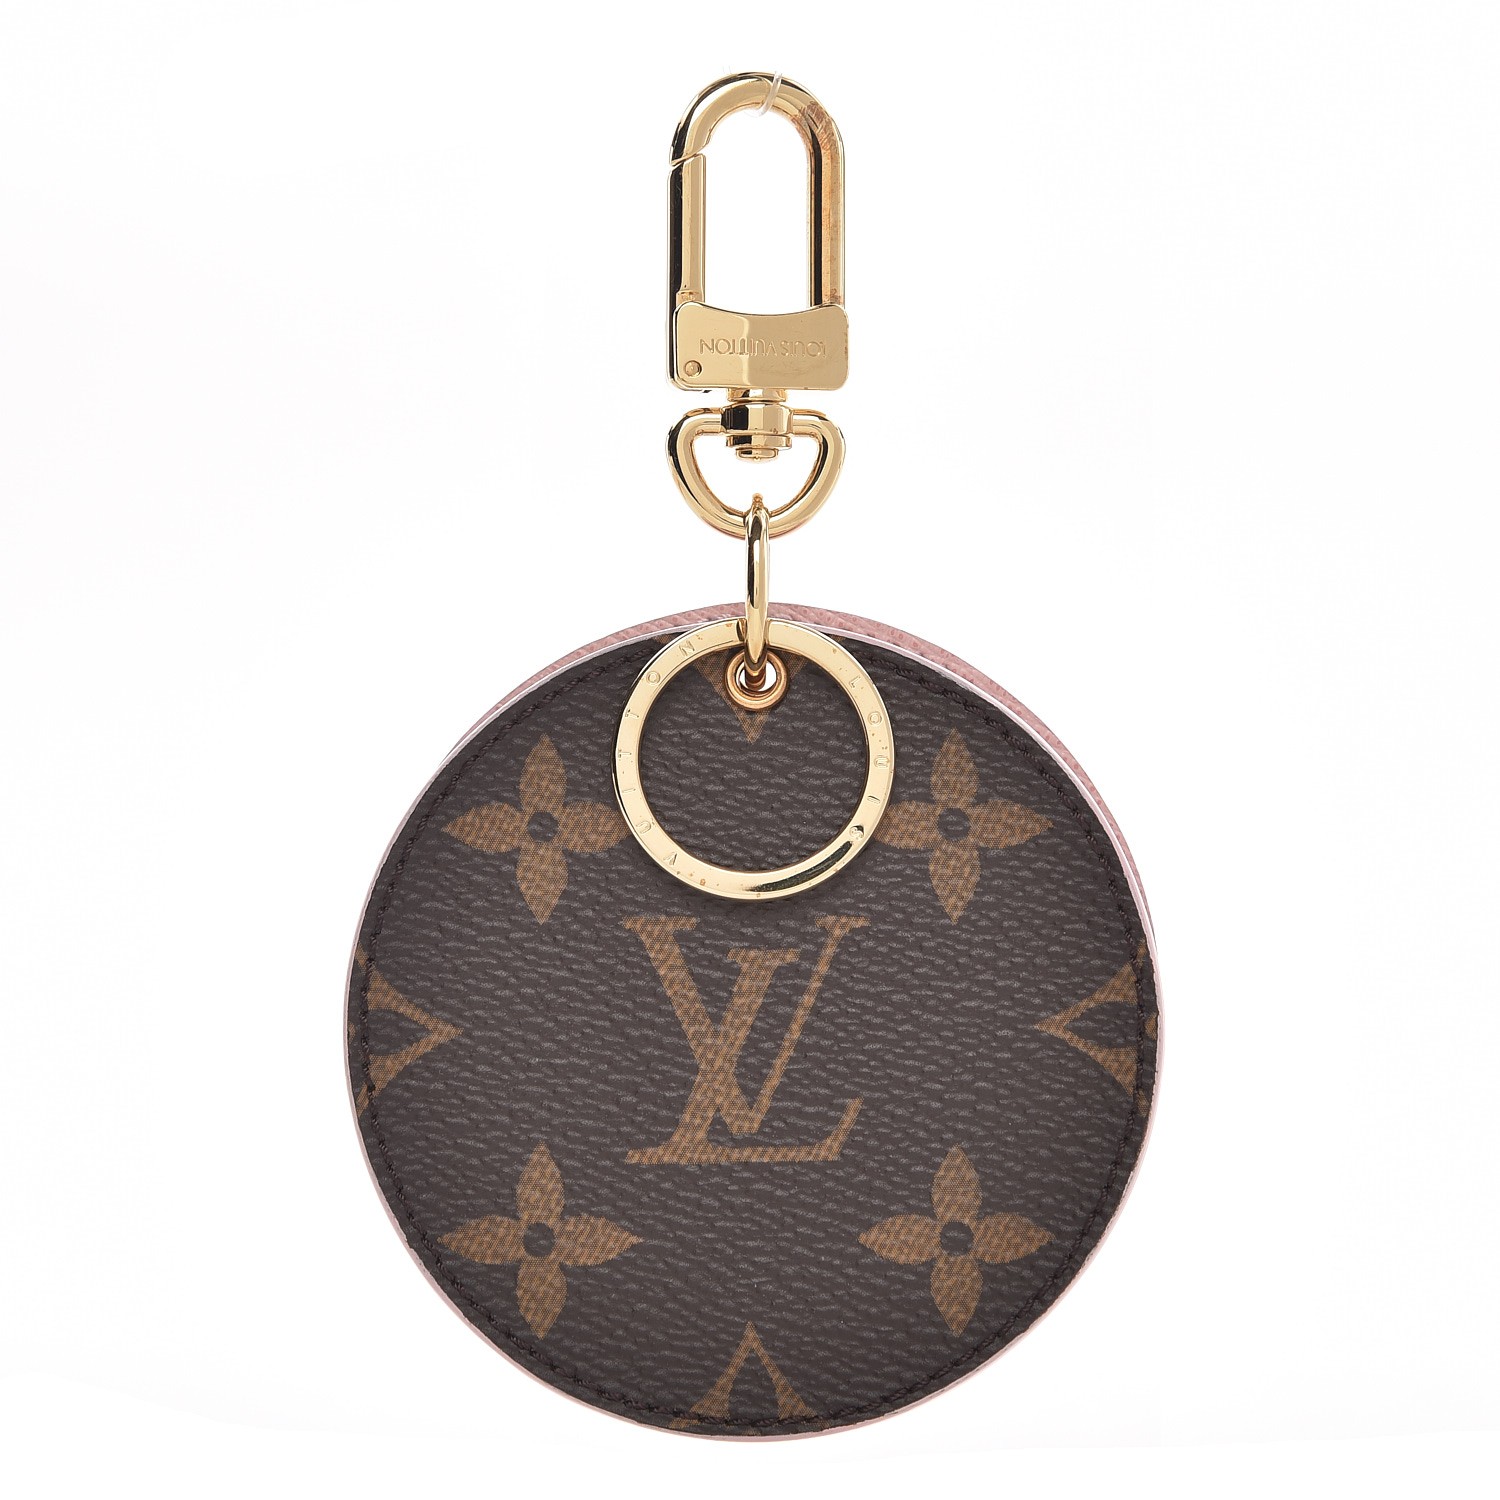 Louis Vuitton 6 Key Ring Holder Review// LV Multicles 6 Key Holder 